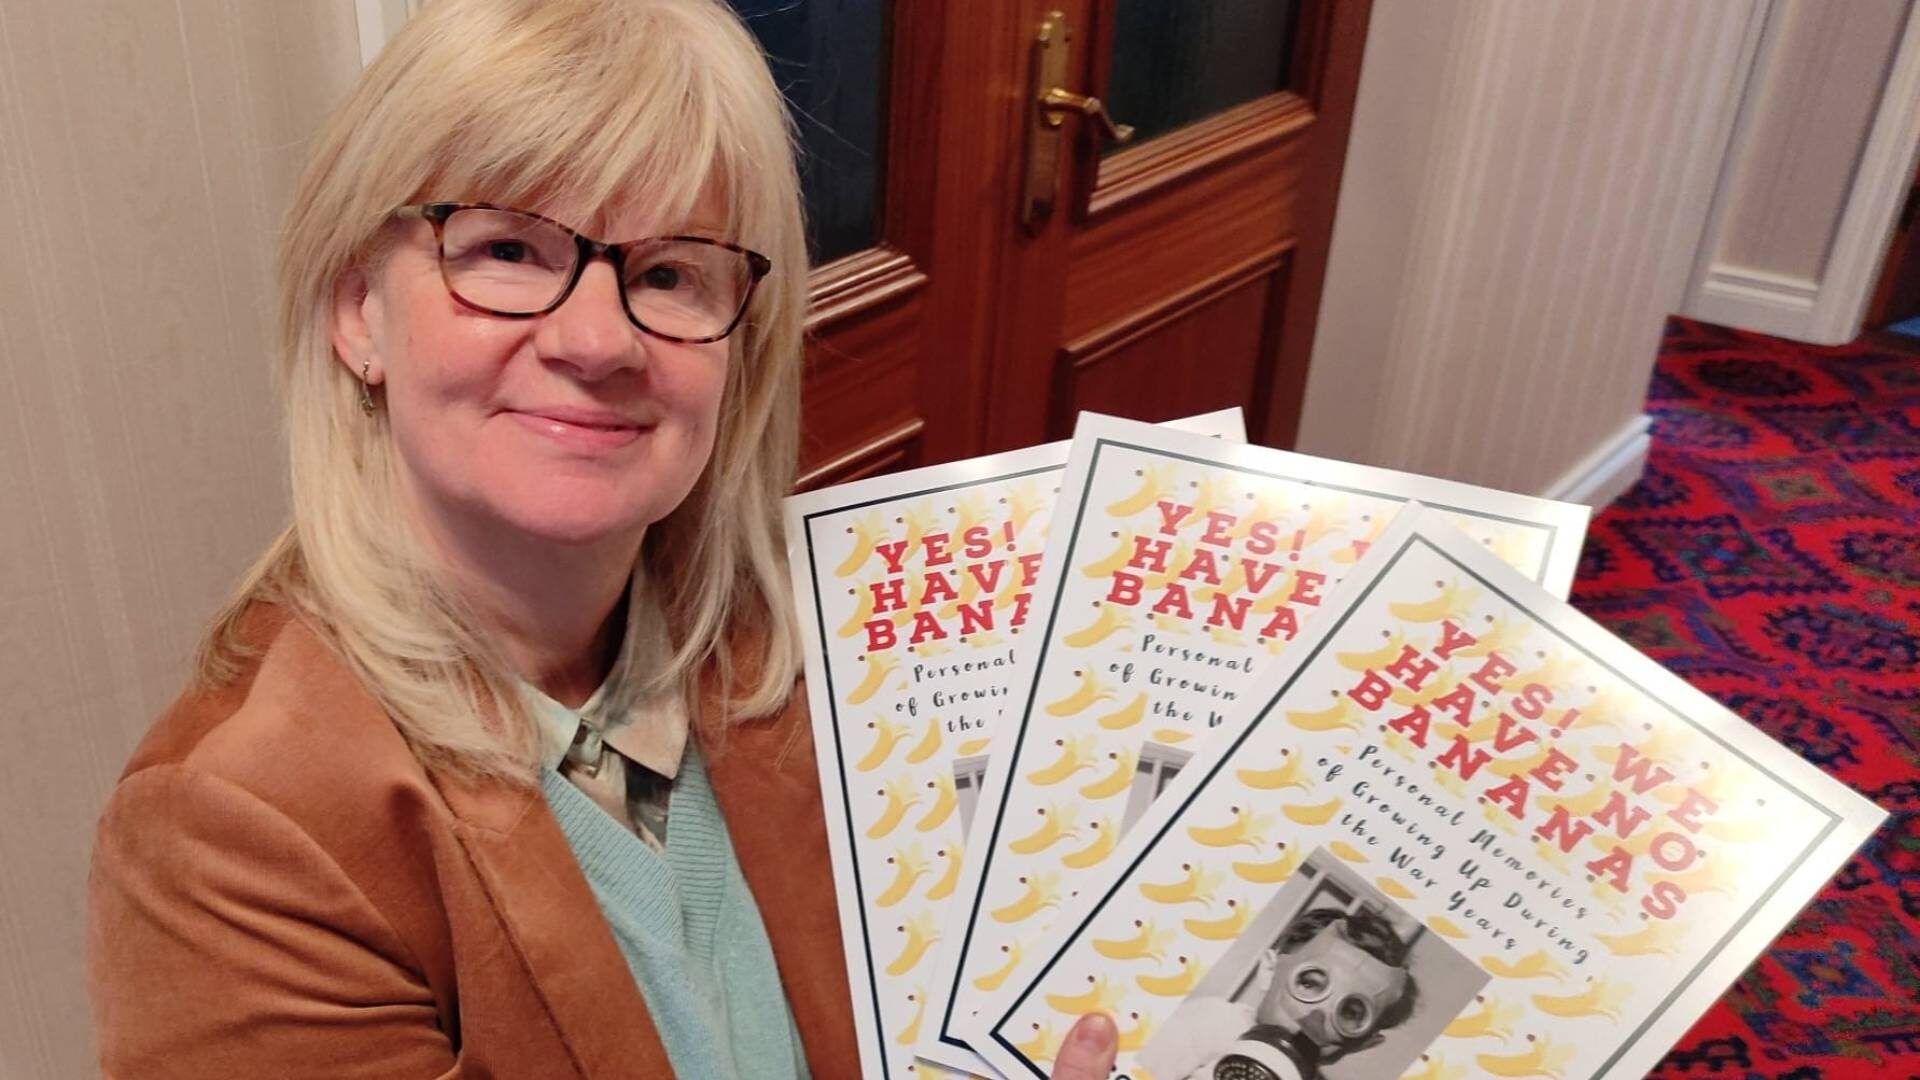 Retired primary school teacher Lorna Quin from Co. Armagh collected a number of stories detailing life in Northern Ireland throughout the Second World War for the first volume of 'Yes, We Have No Bananas' published in 2021.